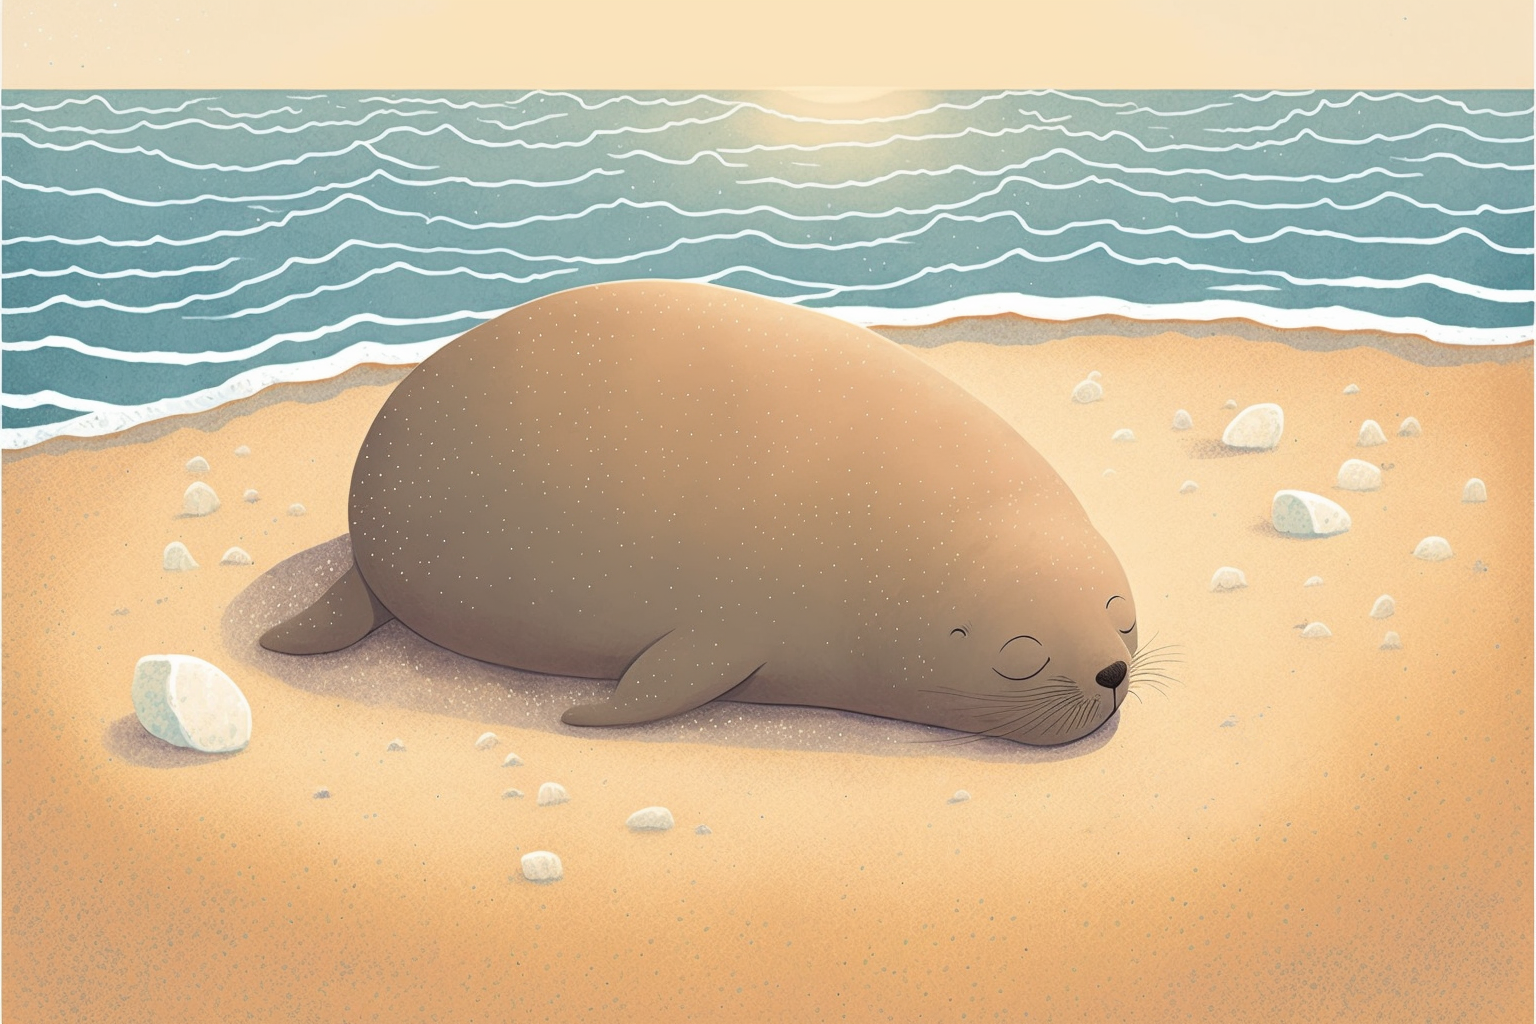 The Snoozing Seal's Slumber